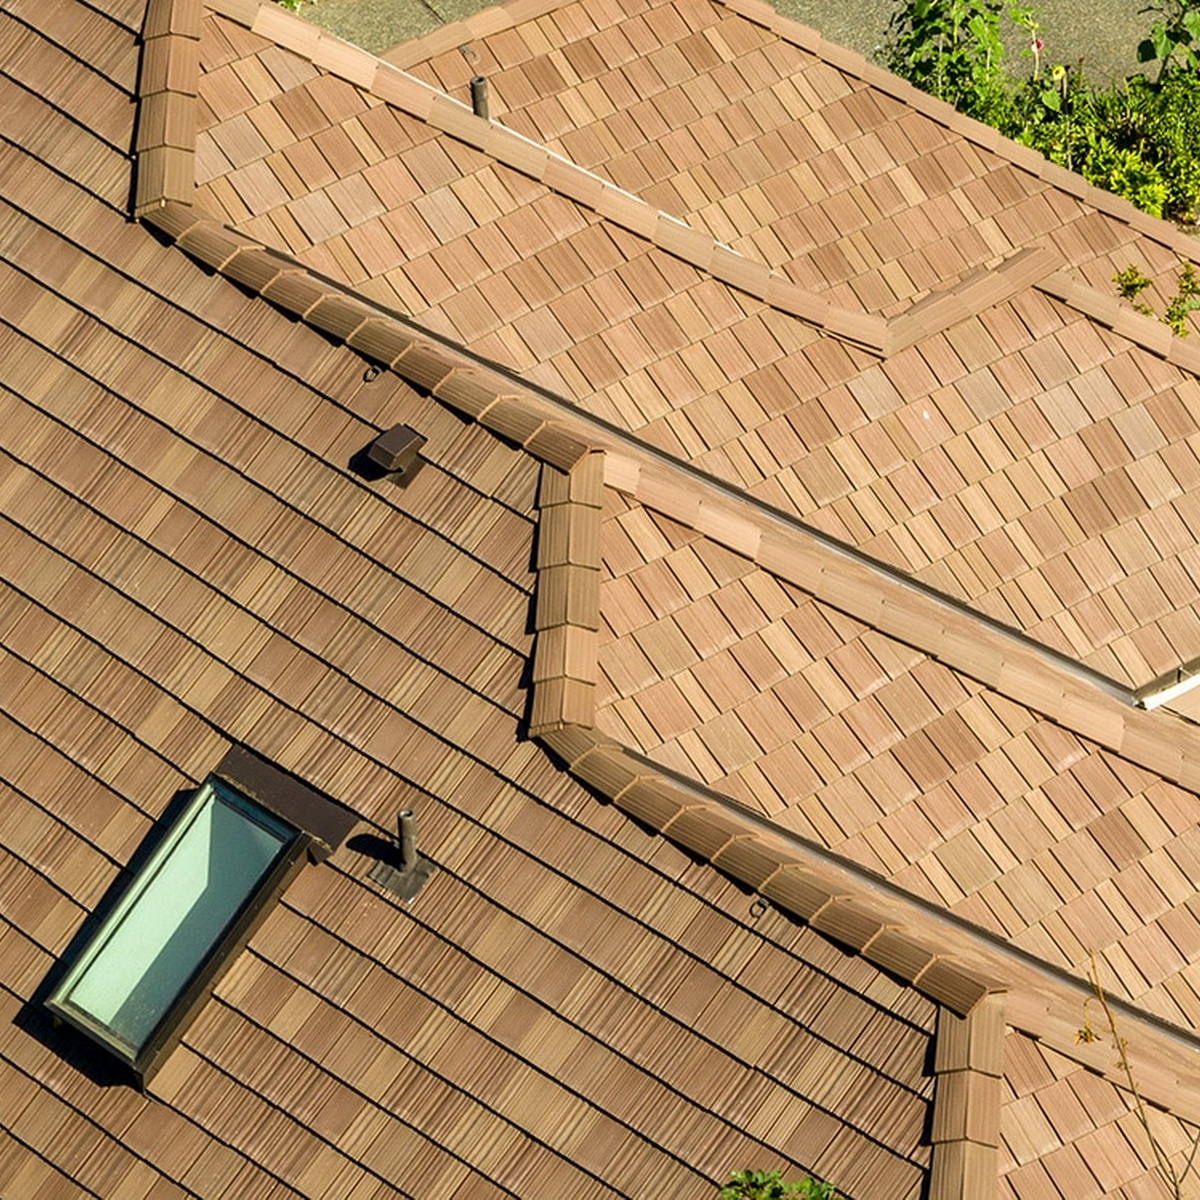 A Rosenberg roof replacement made with DaVinci roof shingles installed by Houston roof experts.